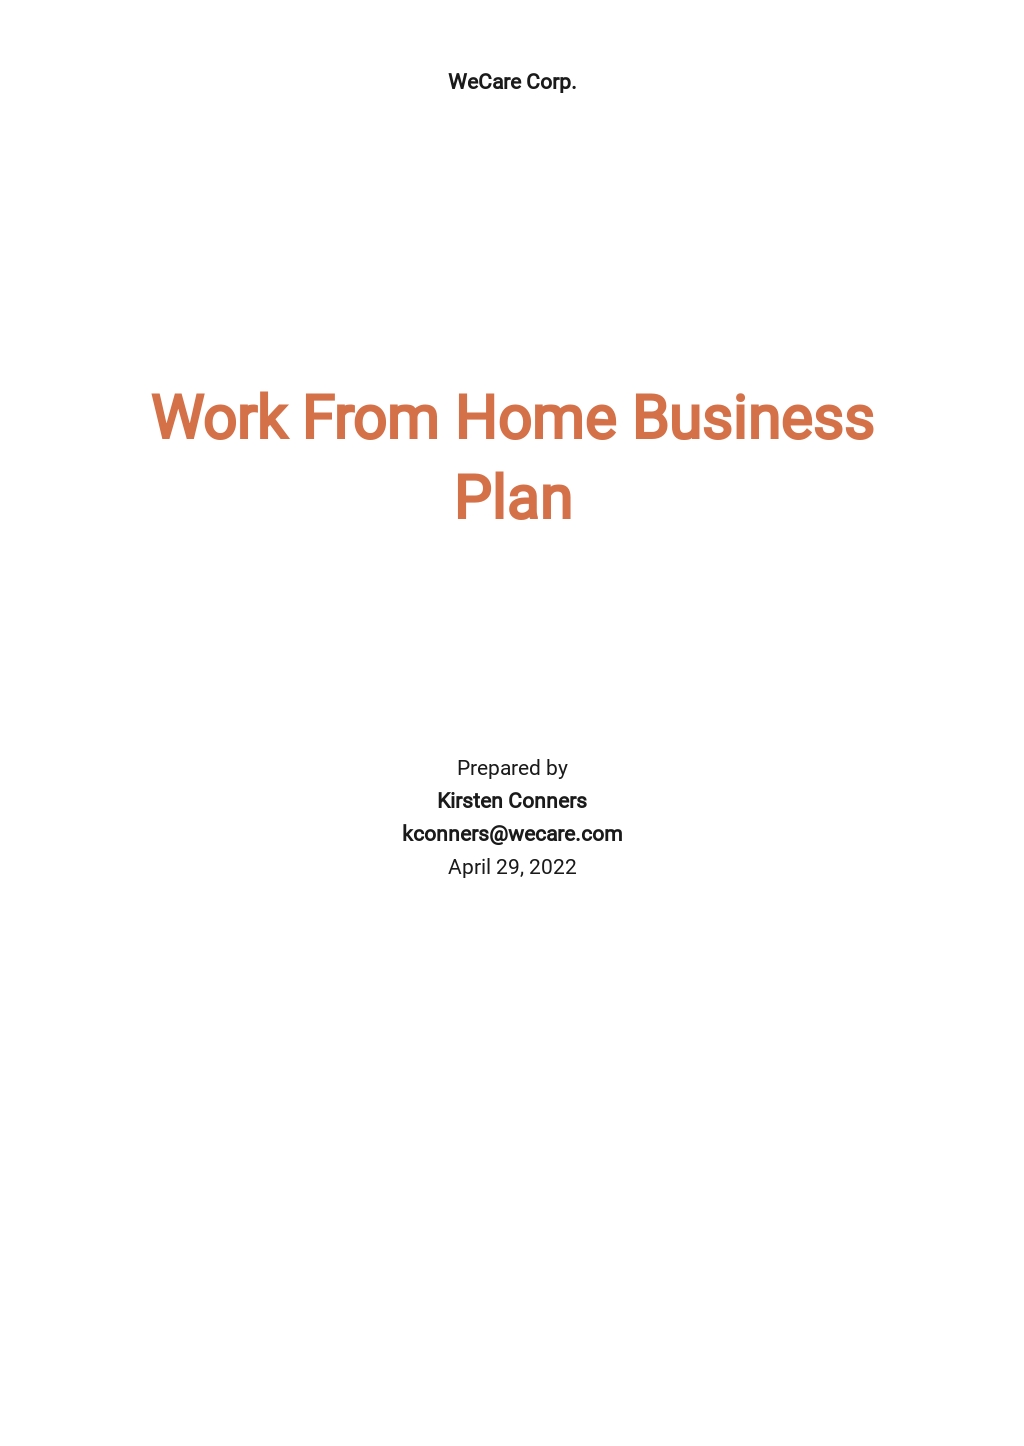 Work From Home Business Plan Template.jpe